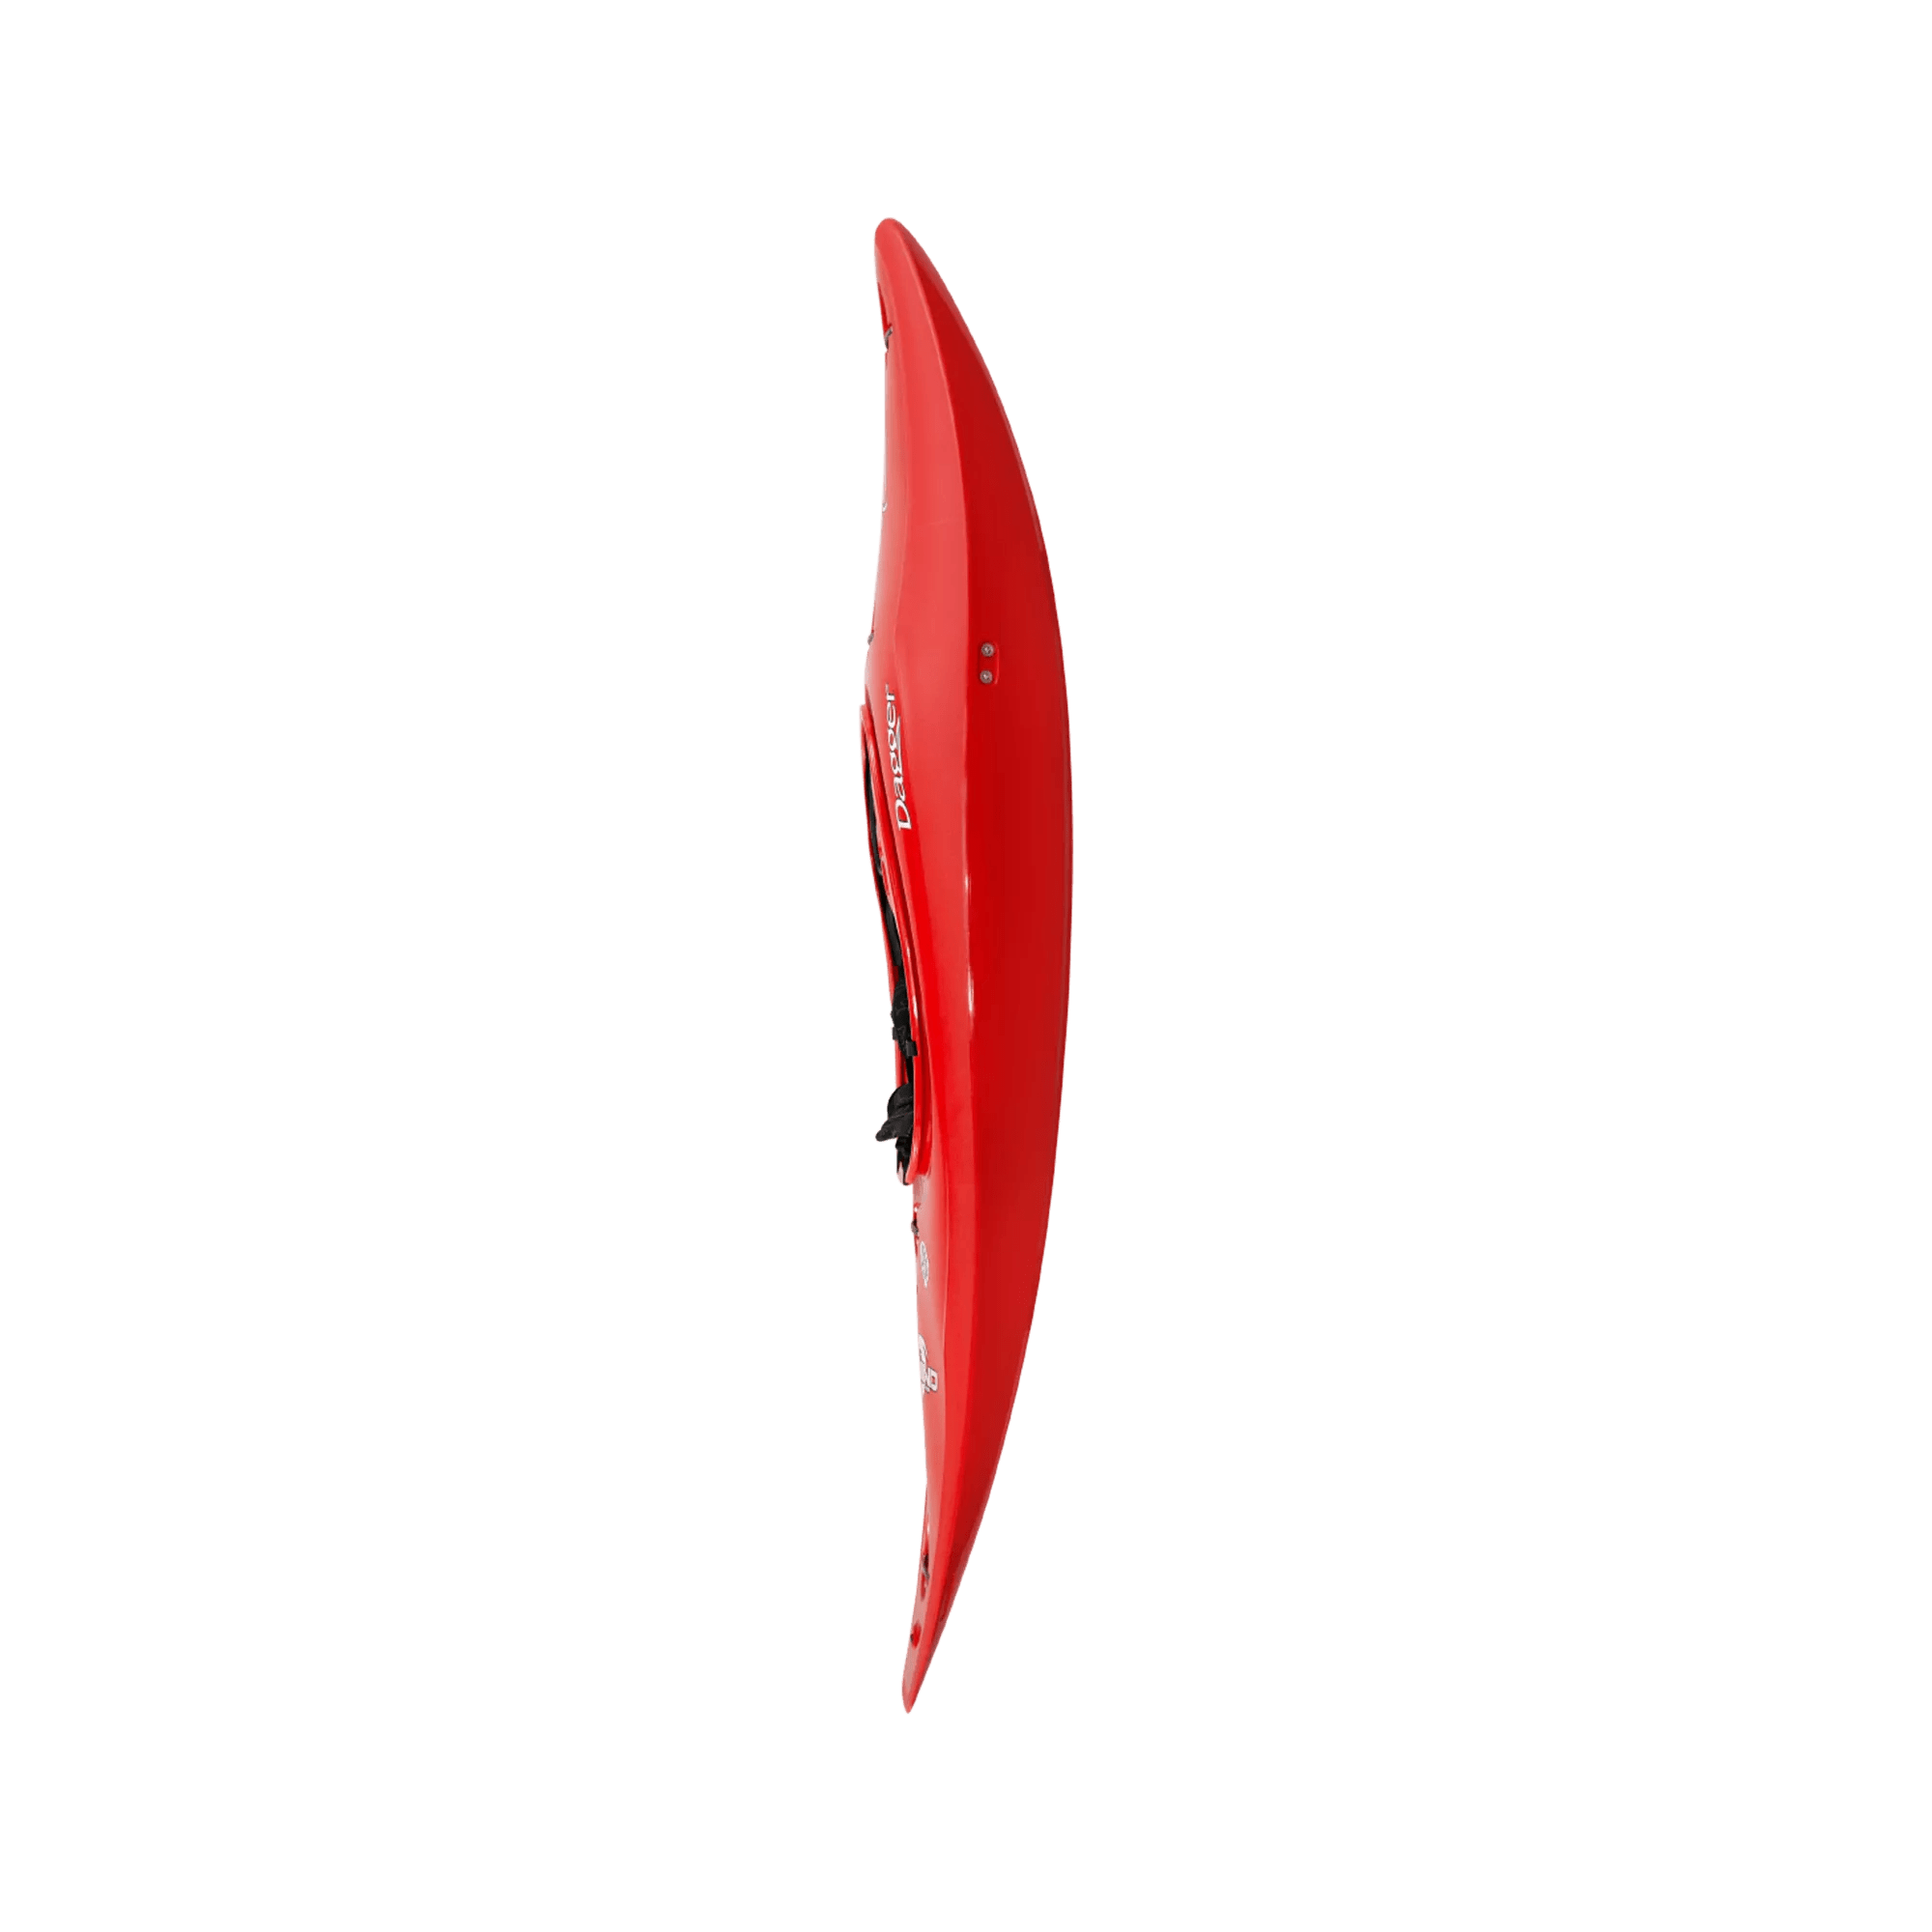 DAGGER - Rewind SM River Play Whitewater Kayak - Red - 9010474057 - SIDE